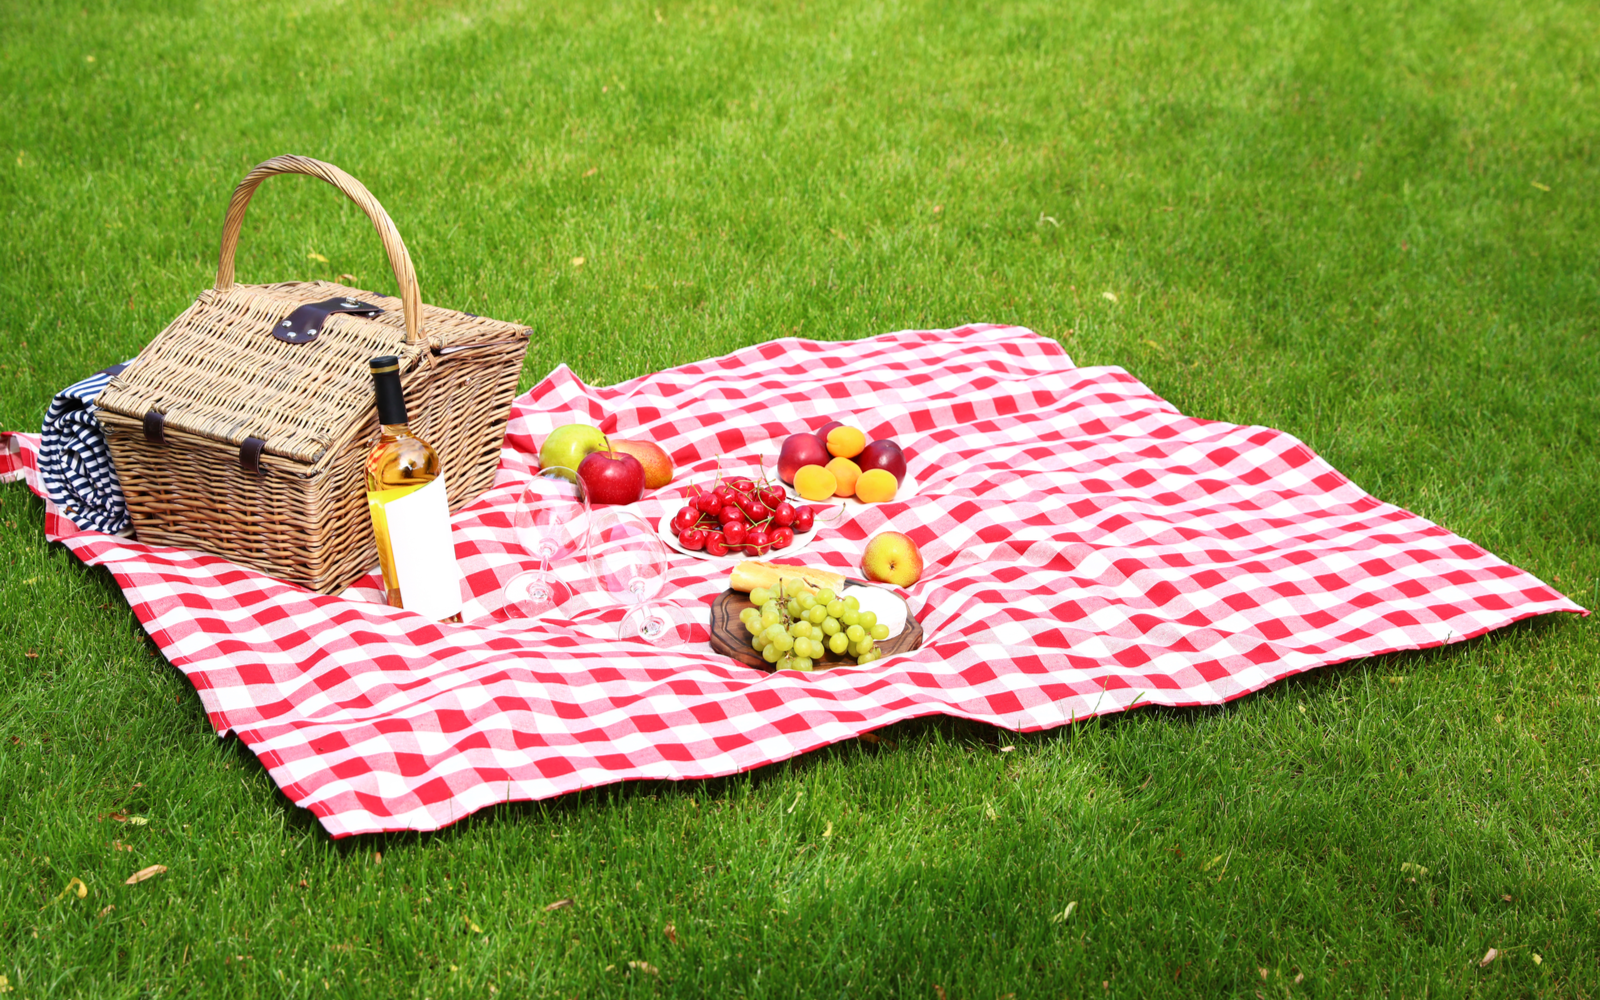 The 7 Best Picnic Blankets in 2022 | Top Picks